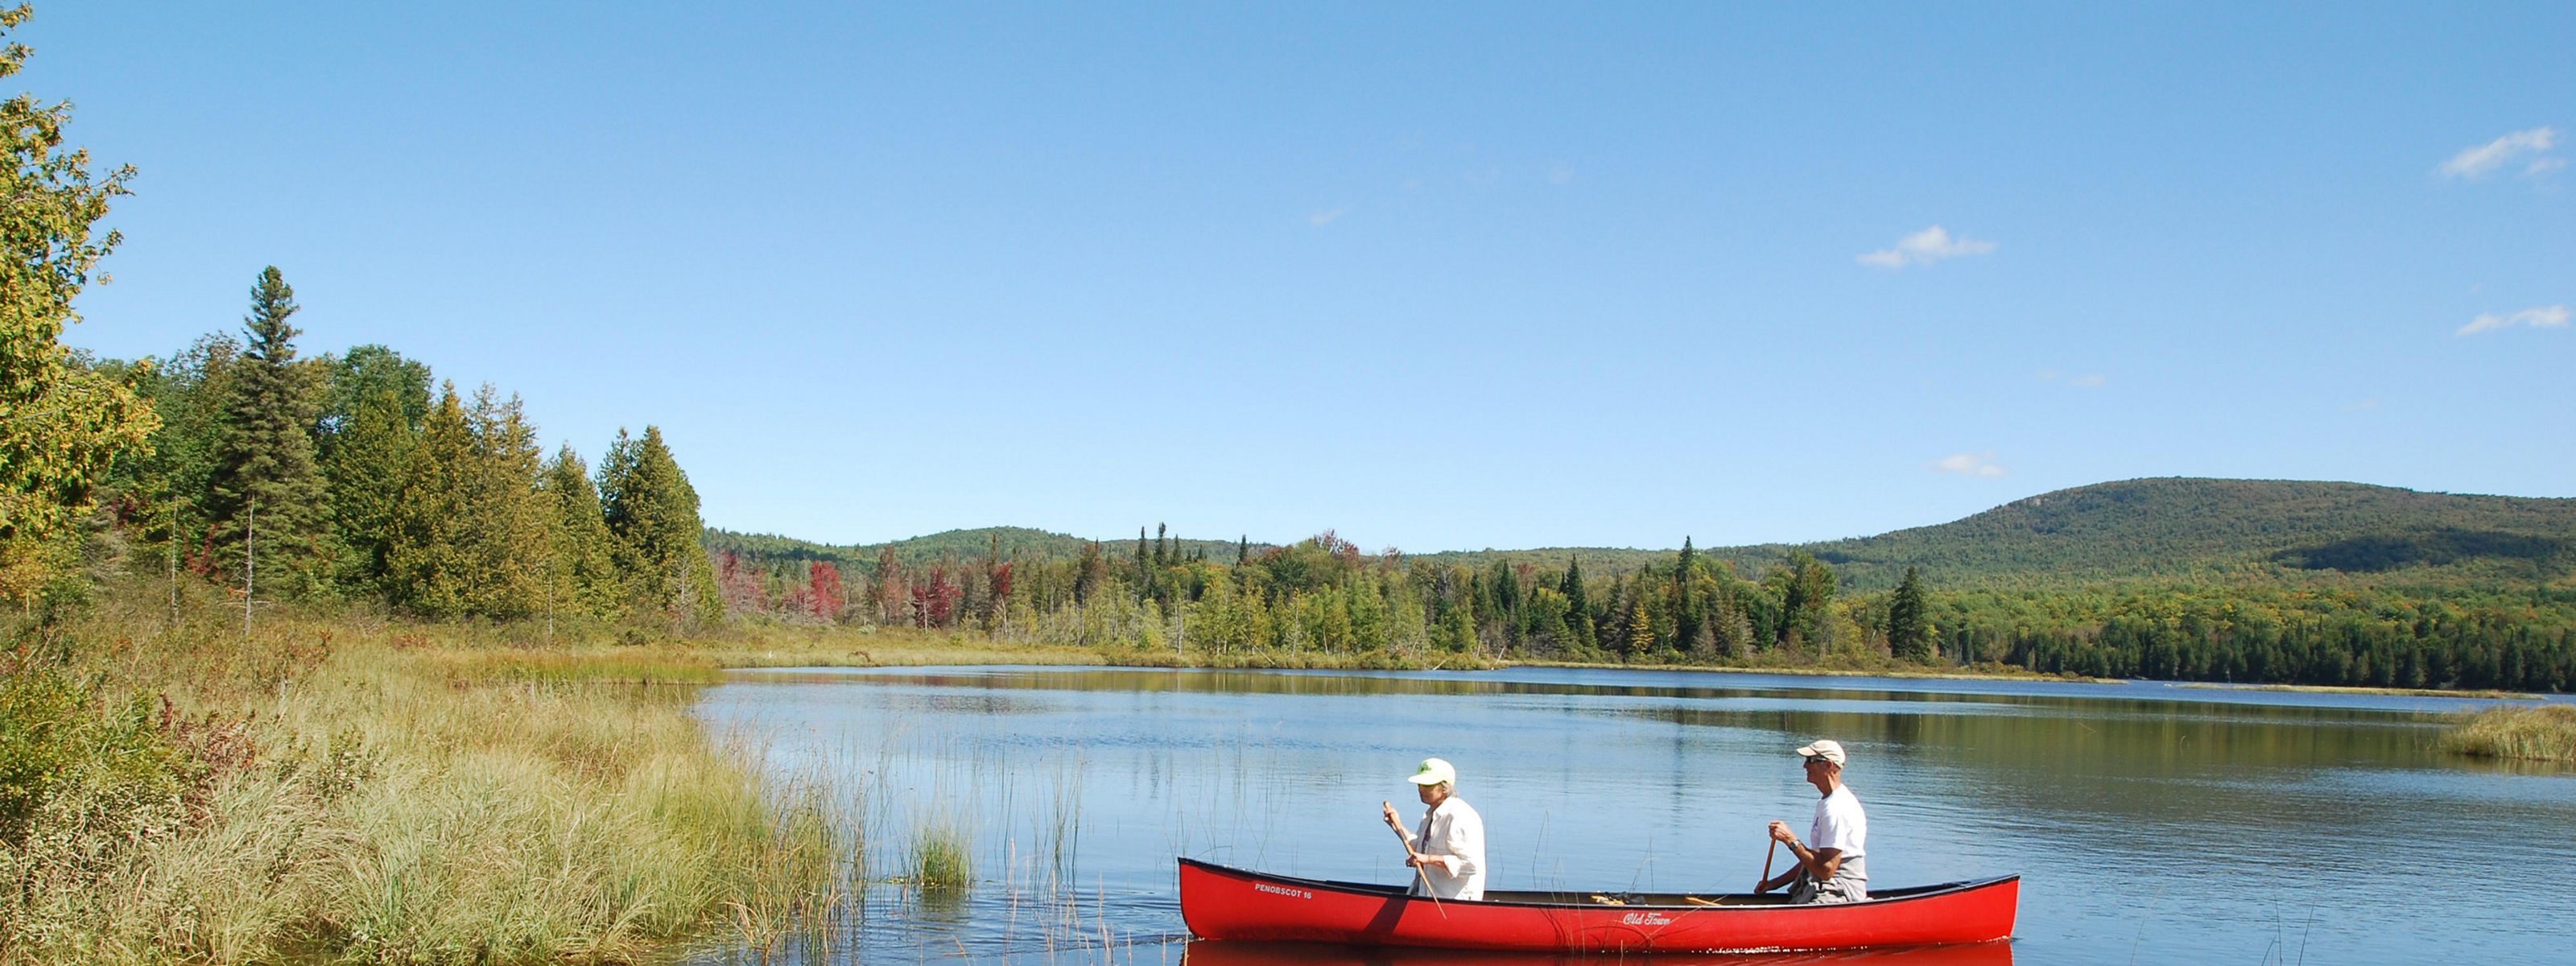 Two people paddle a red canoe on a pond with forested mountain slopes in the background.